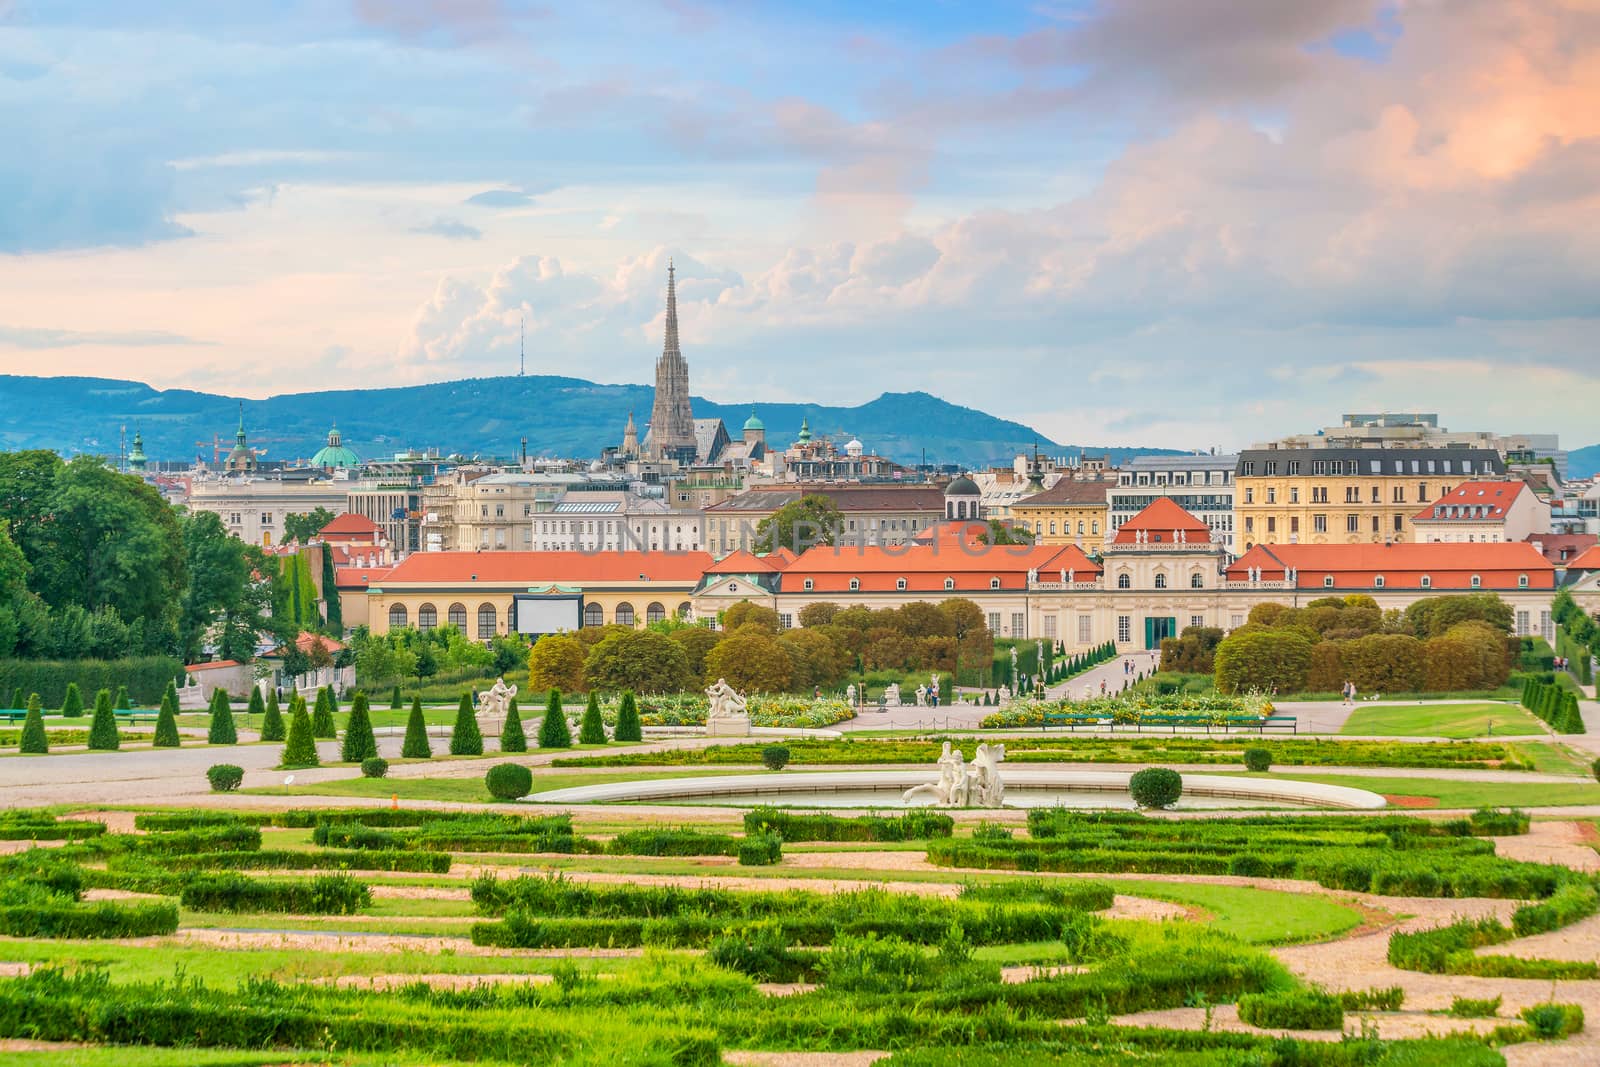 Vienna oldtown city skyline and the garden by f11photo